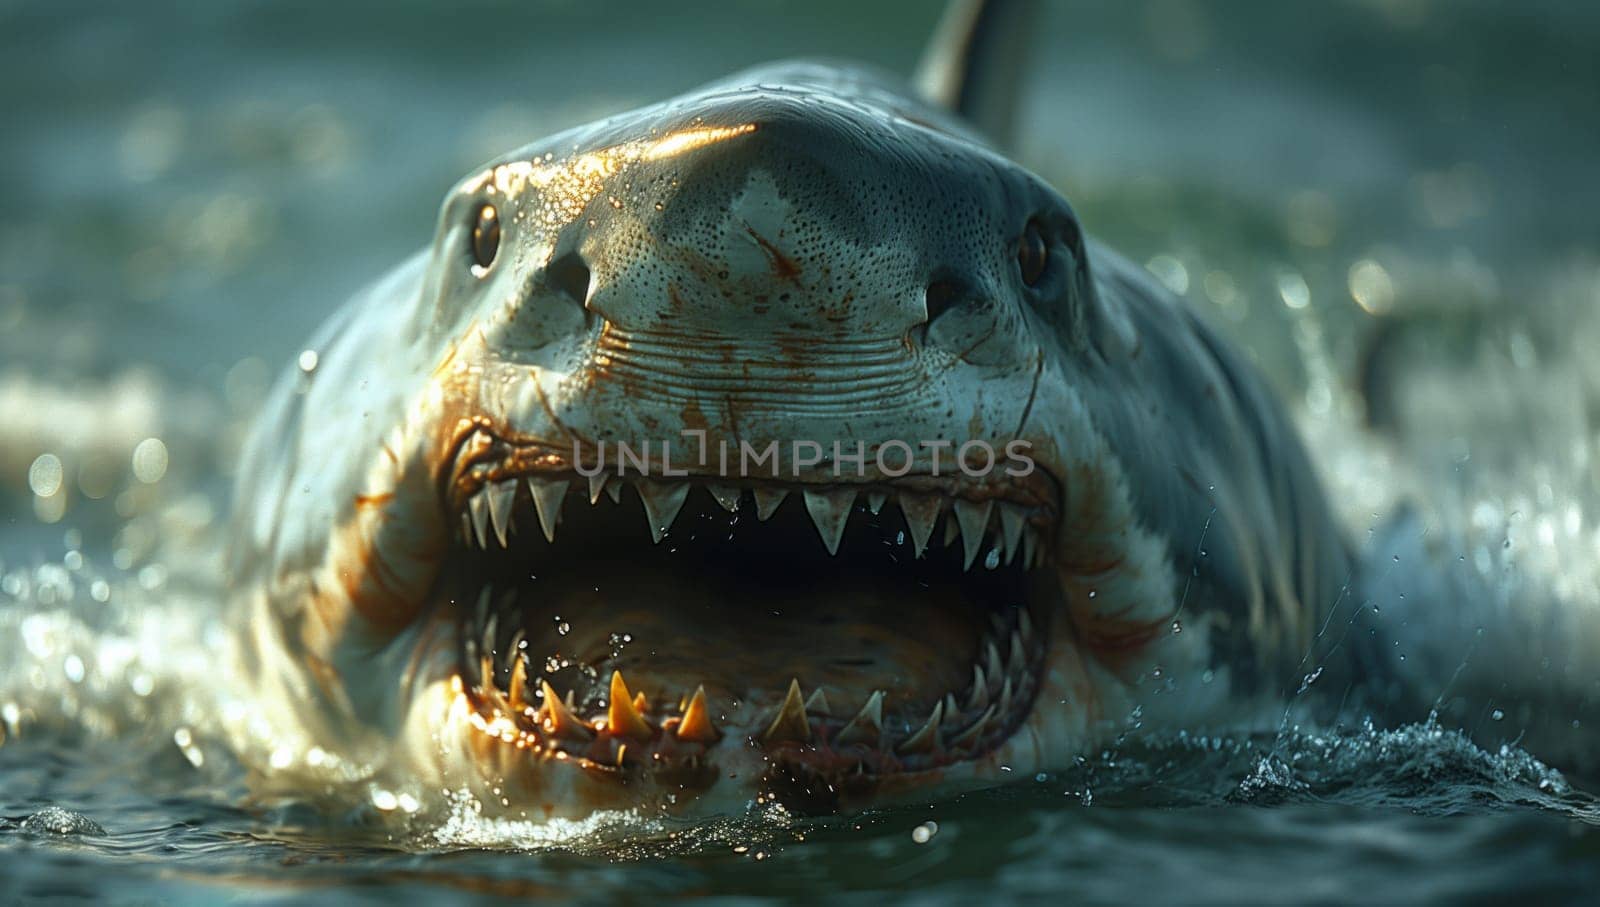 A shark with its jaws open is swimming in the liquid environment, showcasing its fangs and teeth. This behavior is commonly observed in marine biology studies